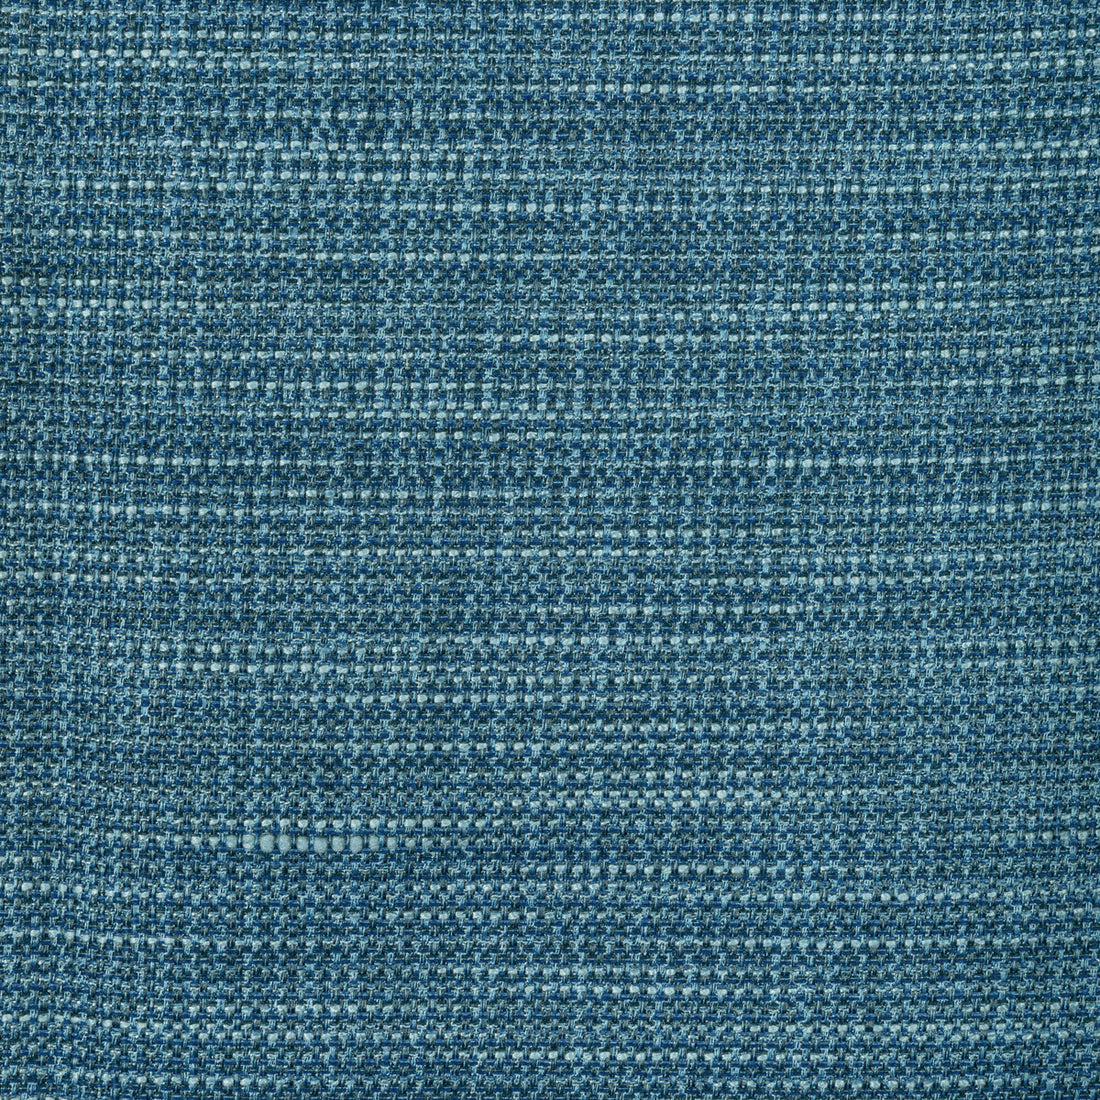 Luma Texture fabric in marine color - pattern 4947.155.0 - by Kravet Contract in the Fr Window Luma Texture collection